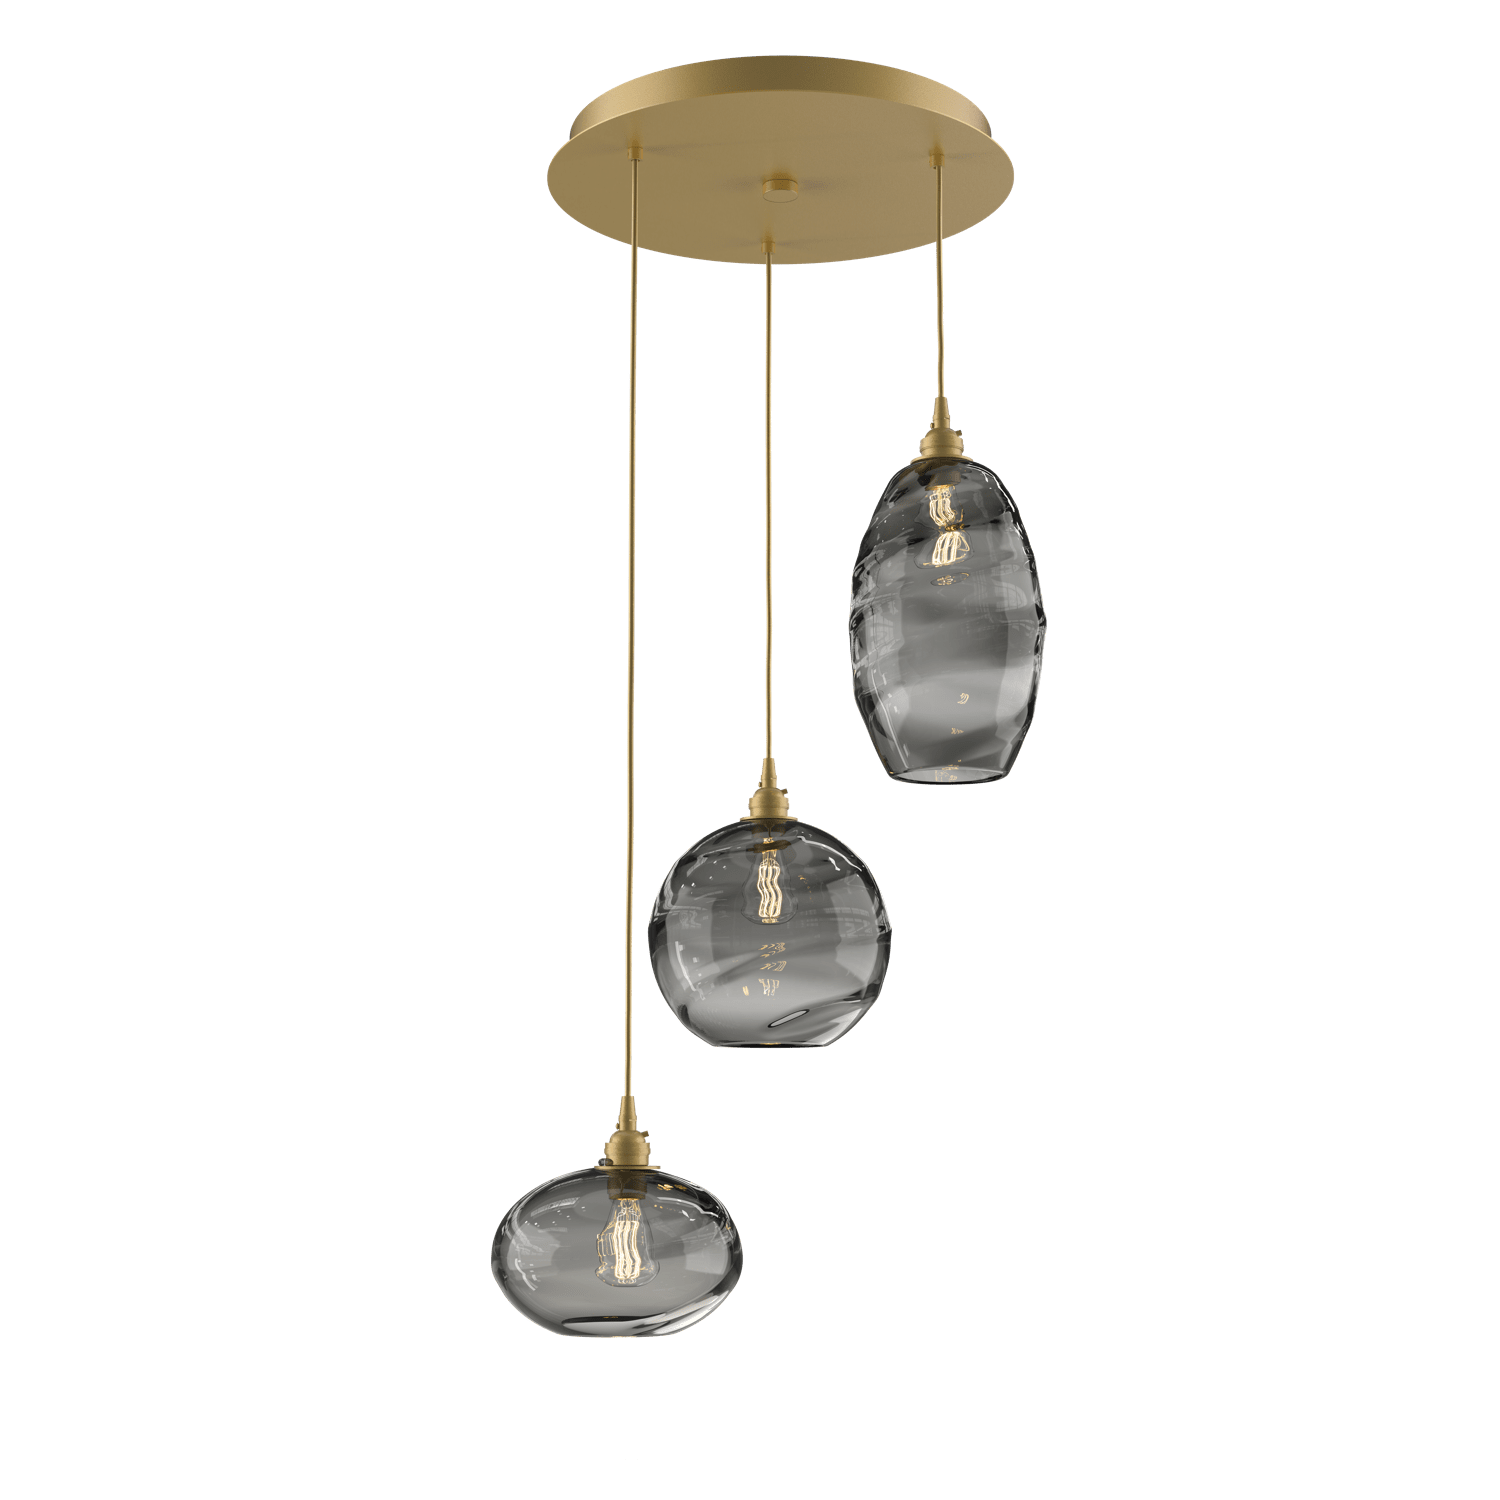 CHB0048-03-GB-OS-Hammerton-Studio-Optic-Blown-Glass-Misto-3-light-round-pendant-chandelier-with-gilded-brass-finish-and-optic-smoke-blown-glass-shades-and-incandescent-lamping